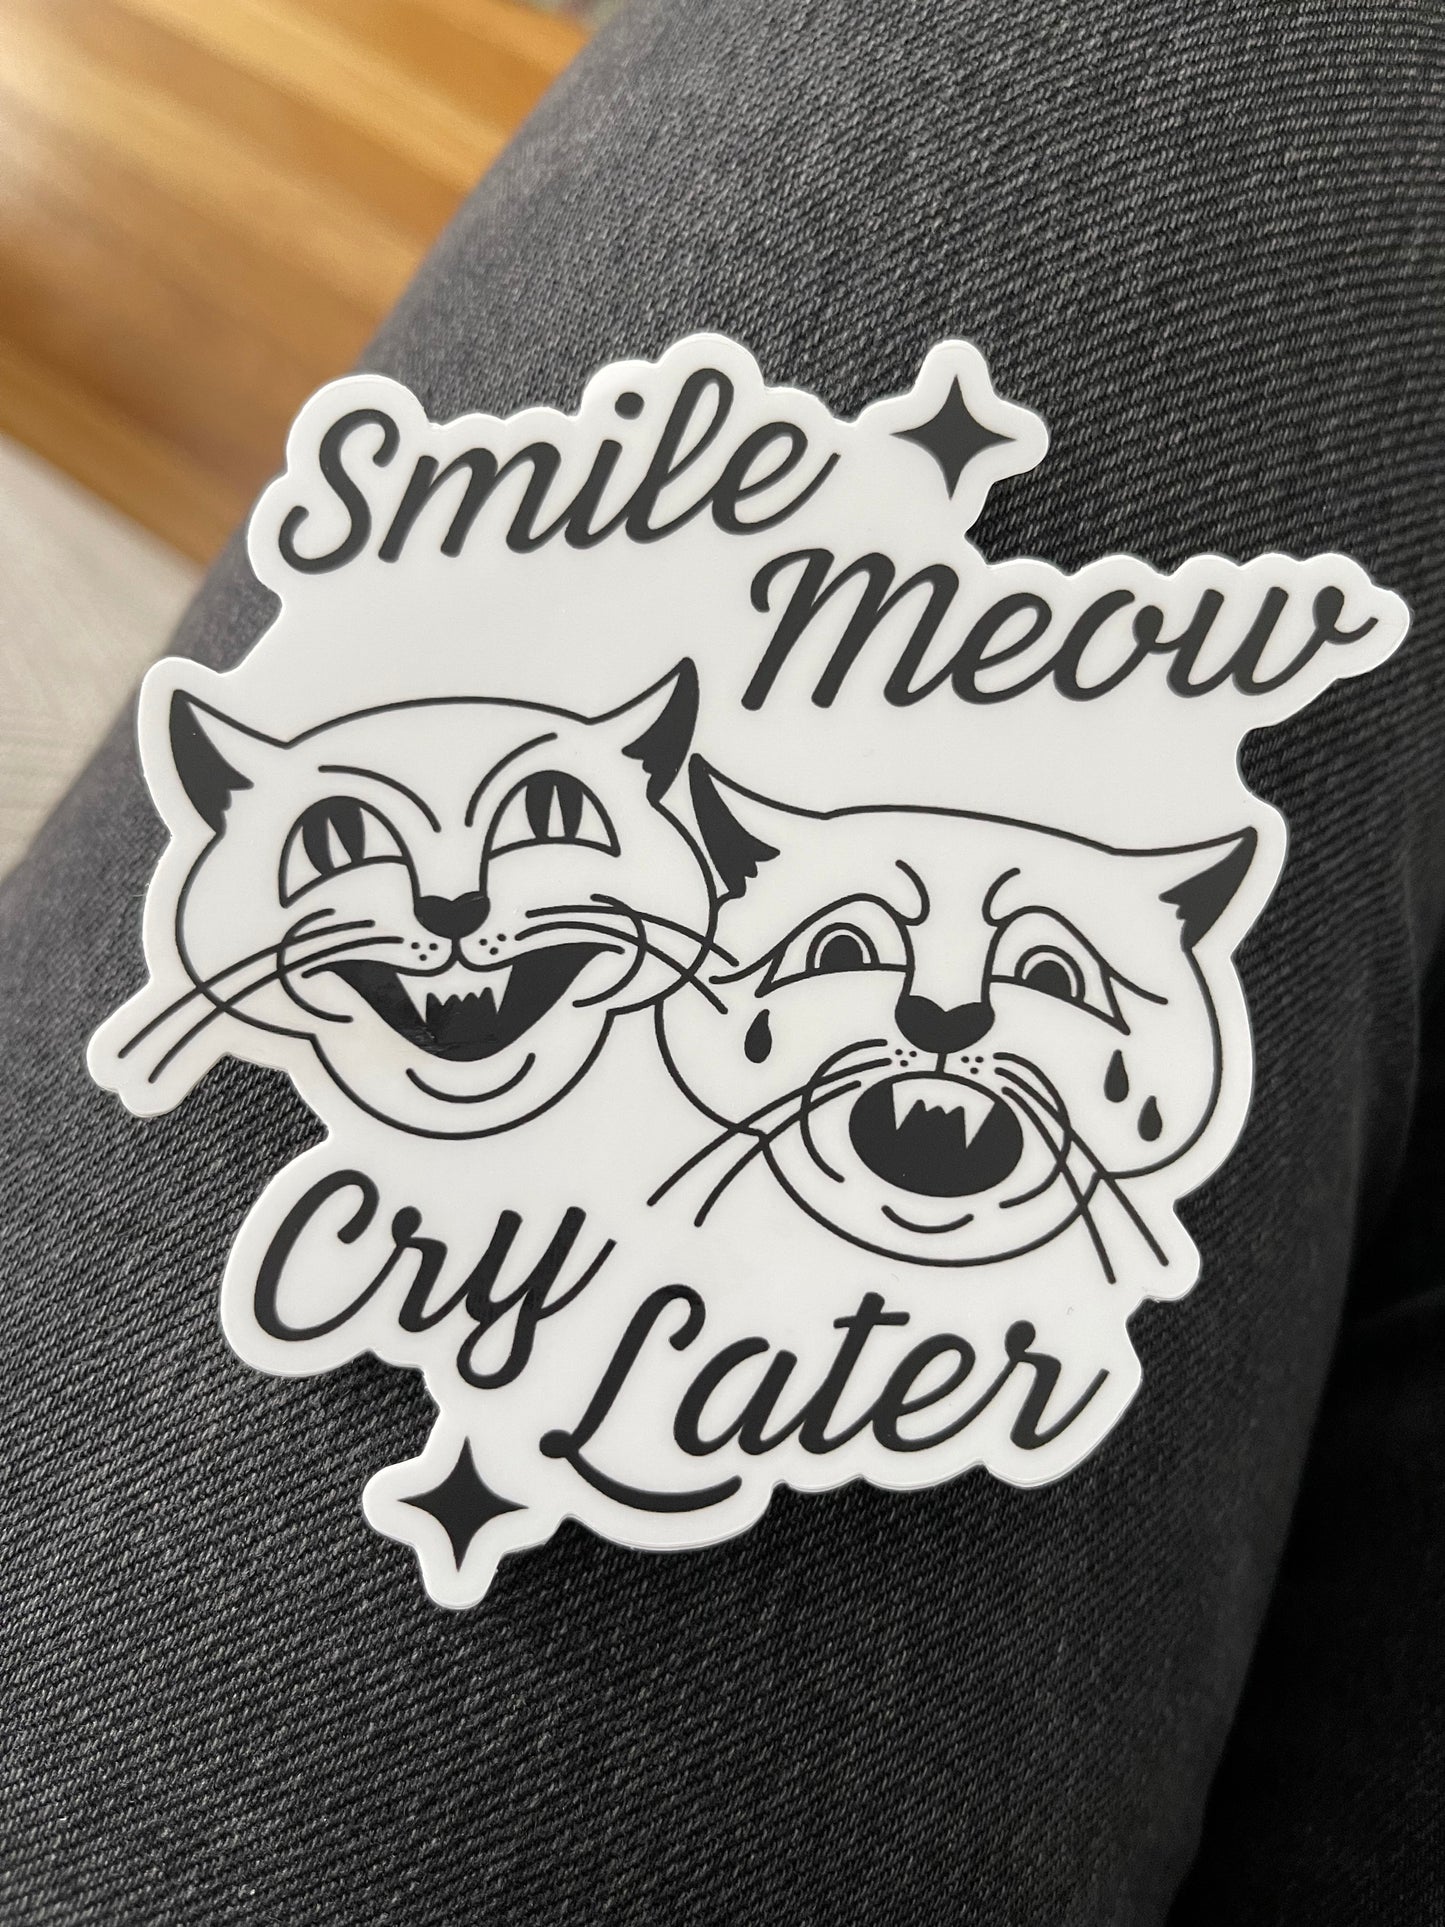 Smile Meow, Cry Later Sticker